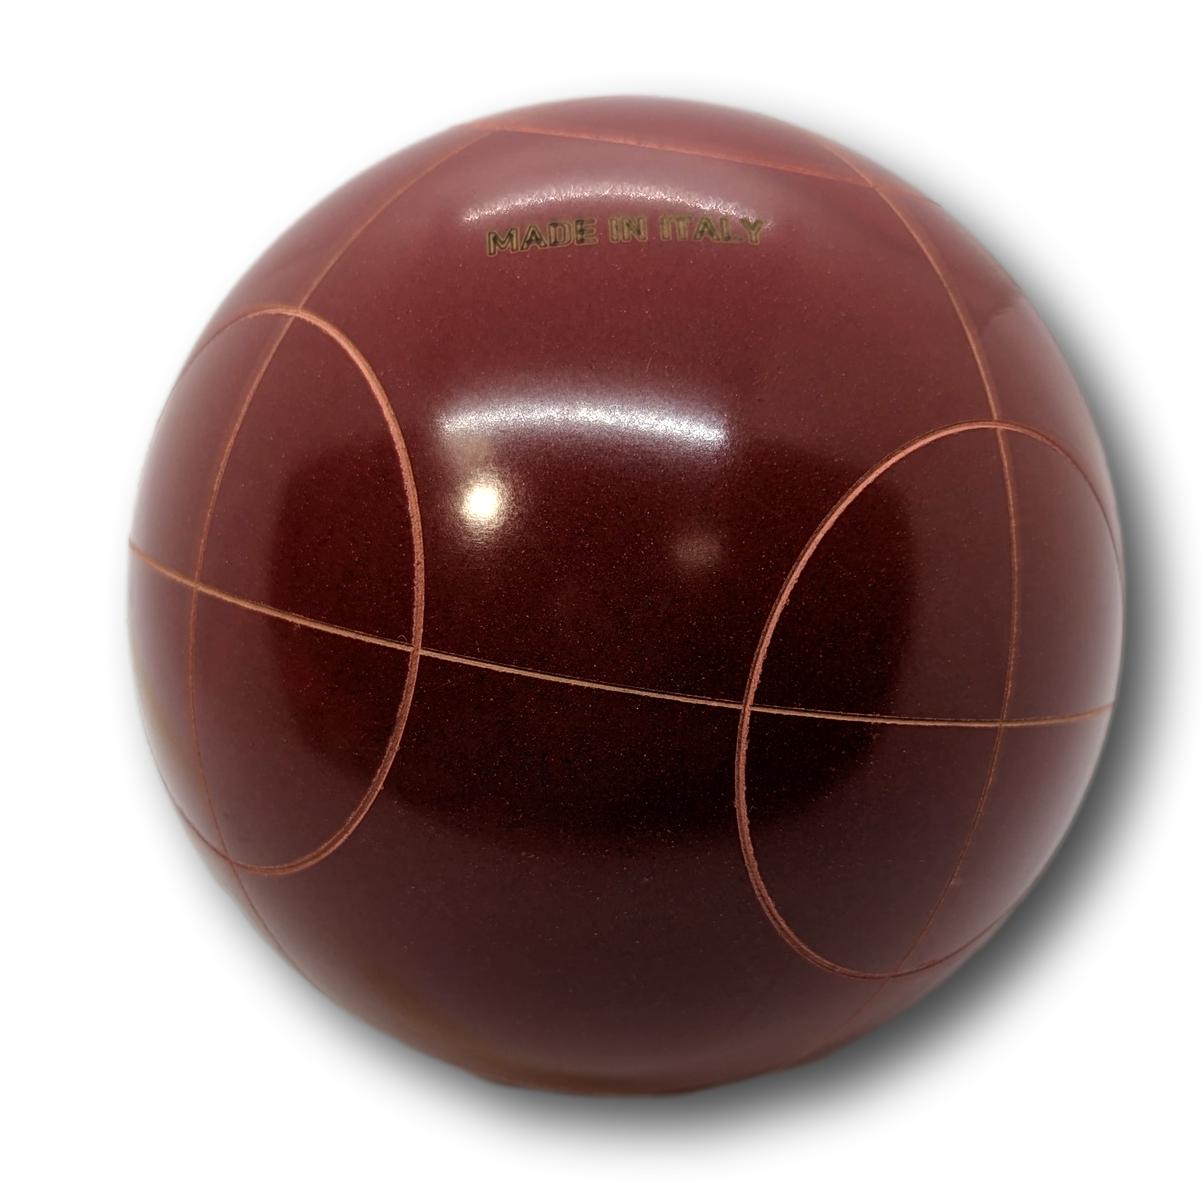 Super Martel Solid Color Bocce Ball Set 107mm Made in Italy - Playaboule